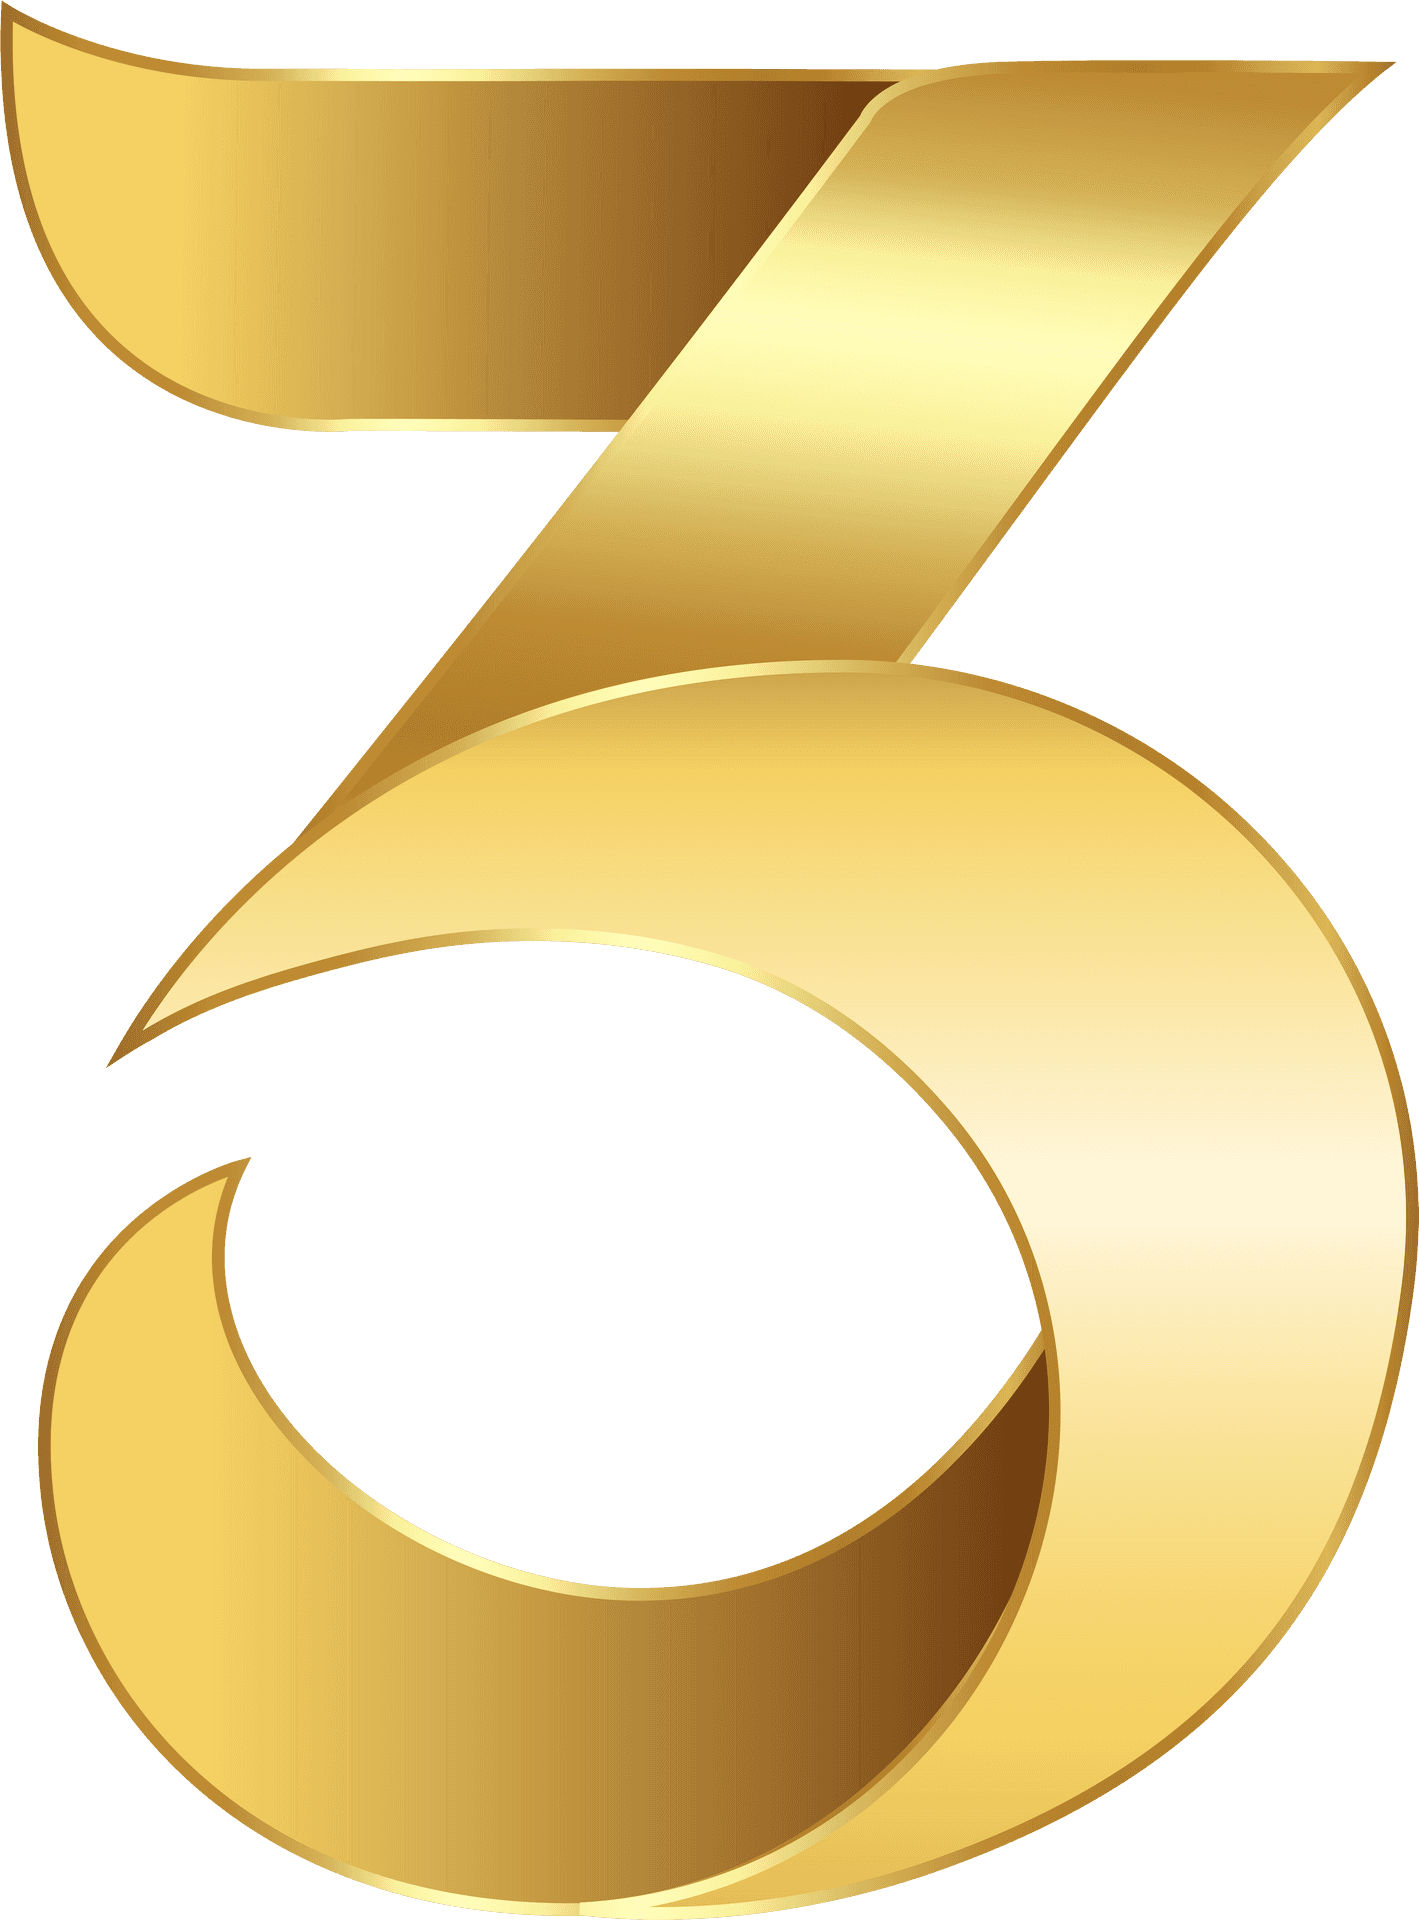 Golden Number Three Graphic PNG image